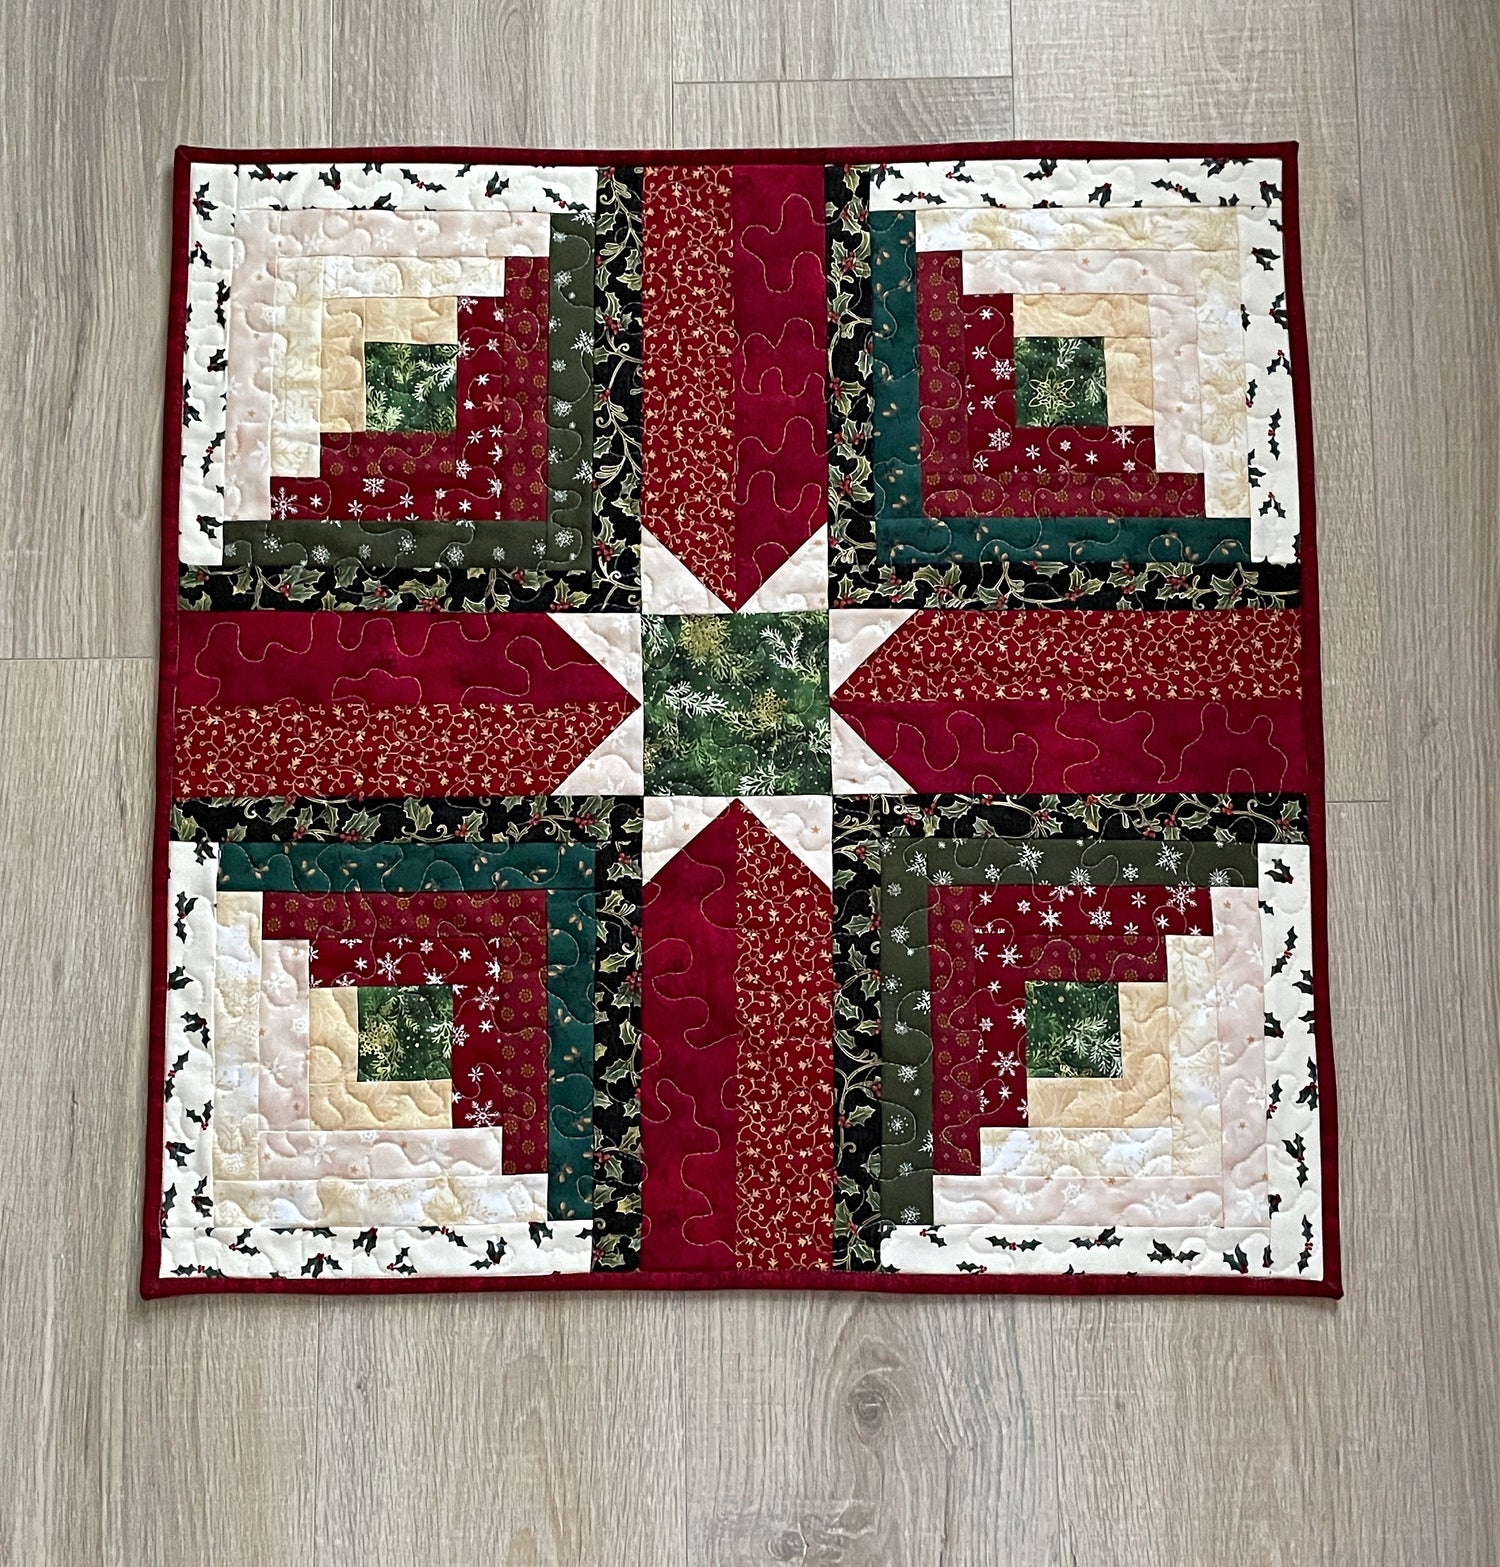 Christmas Log Cabin Star Table Topper in Red, Green and Cream.